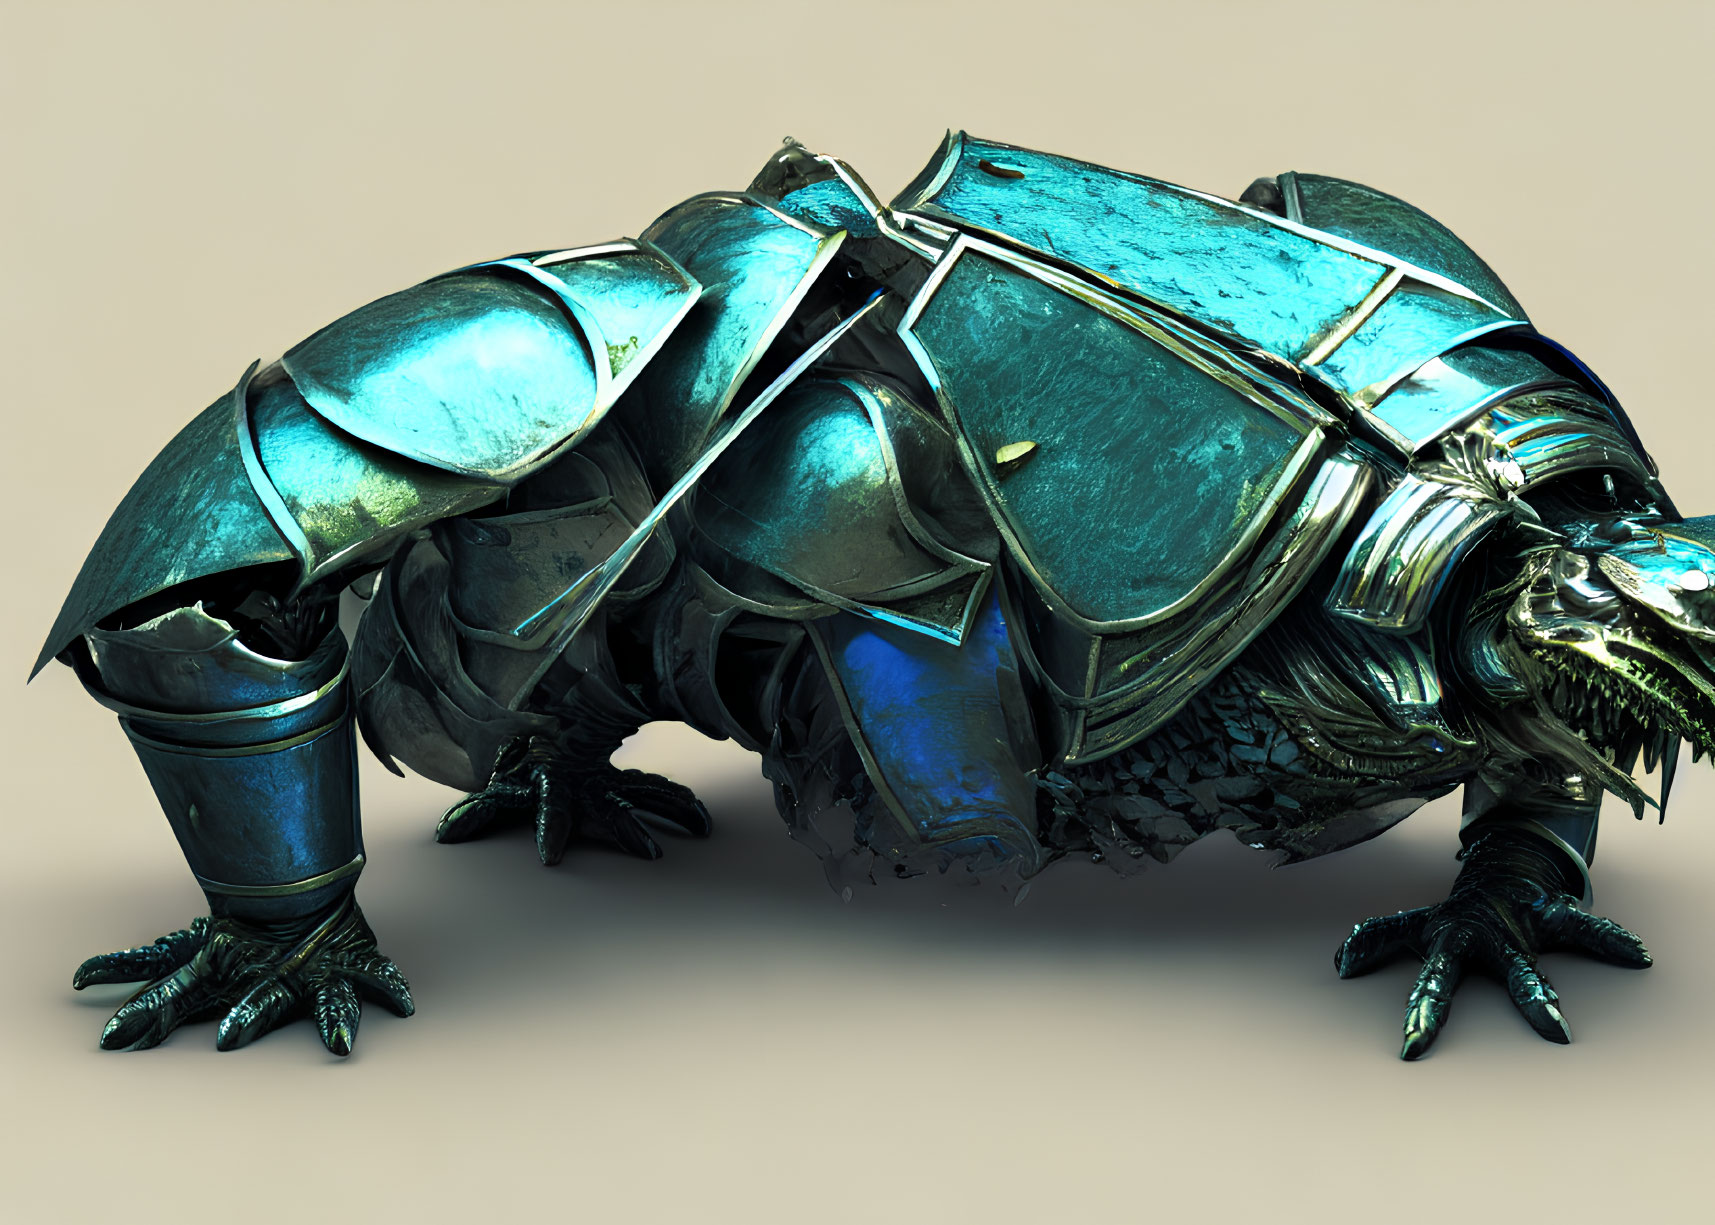 Stylized armored reptile with metallic blue plating on neutral background